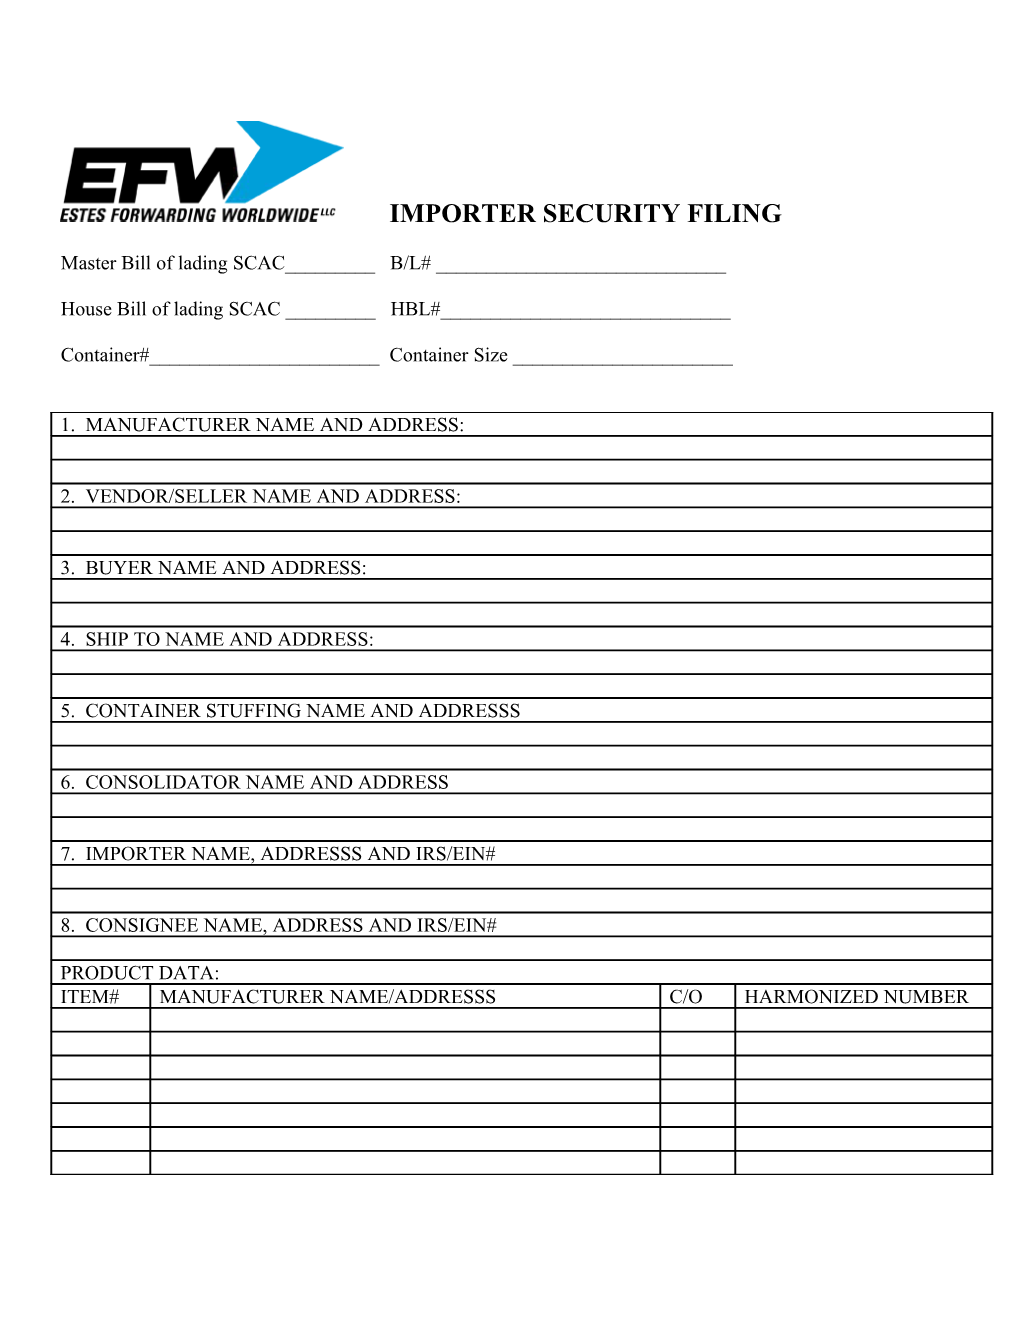 Importer Security Filing